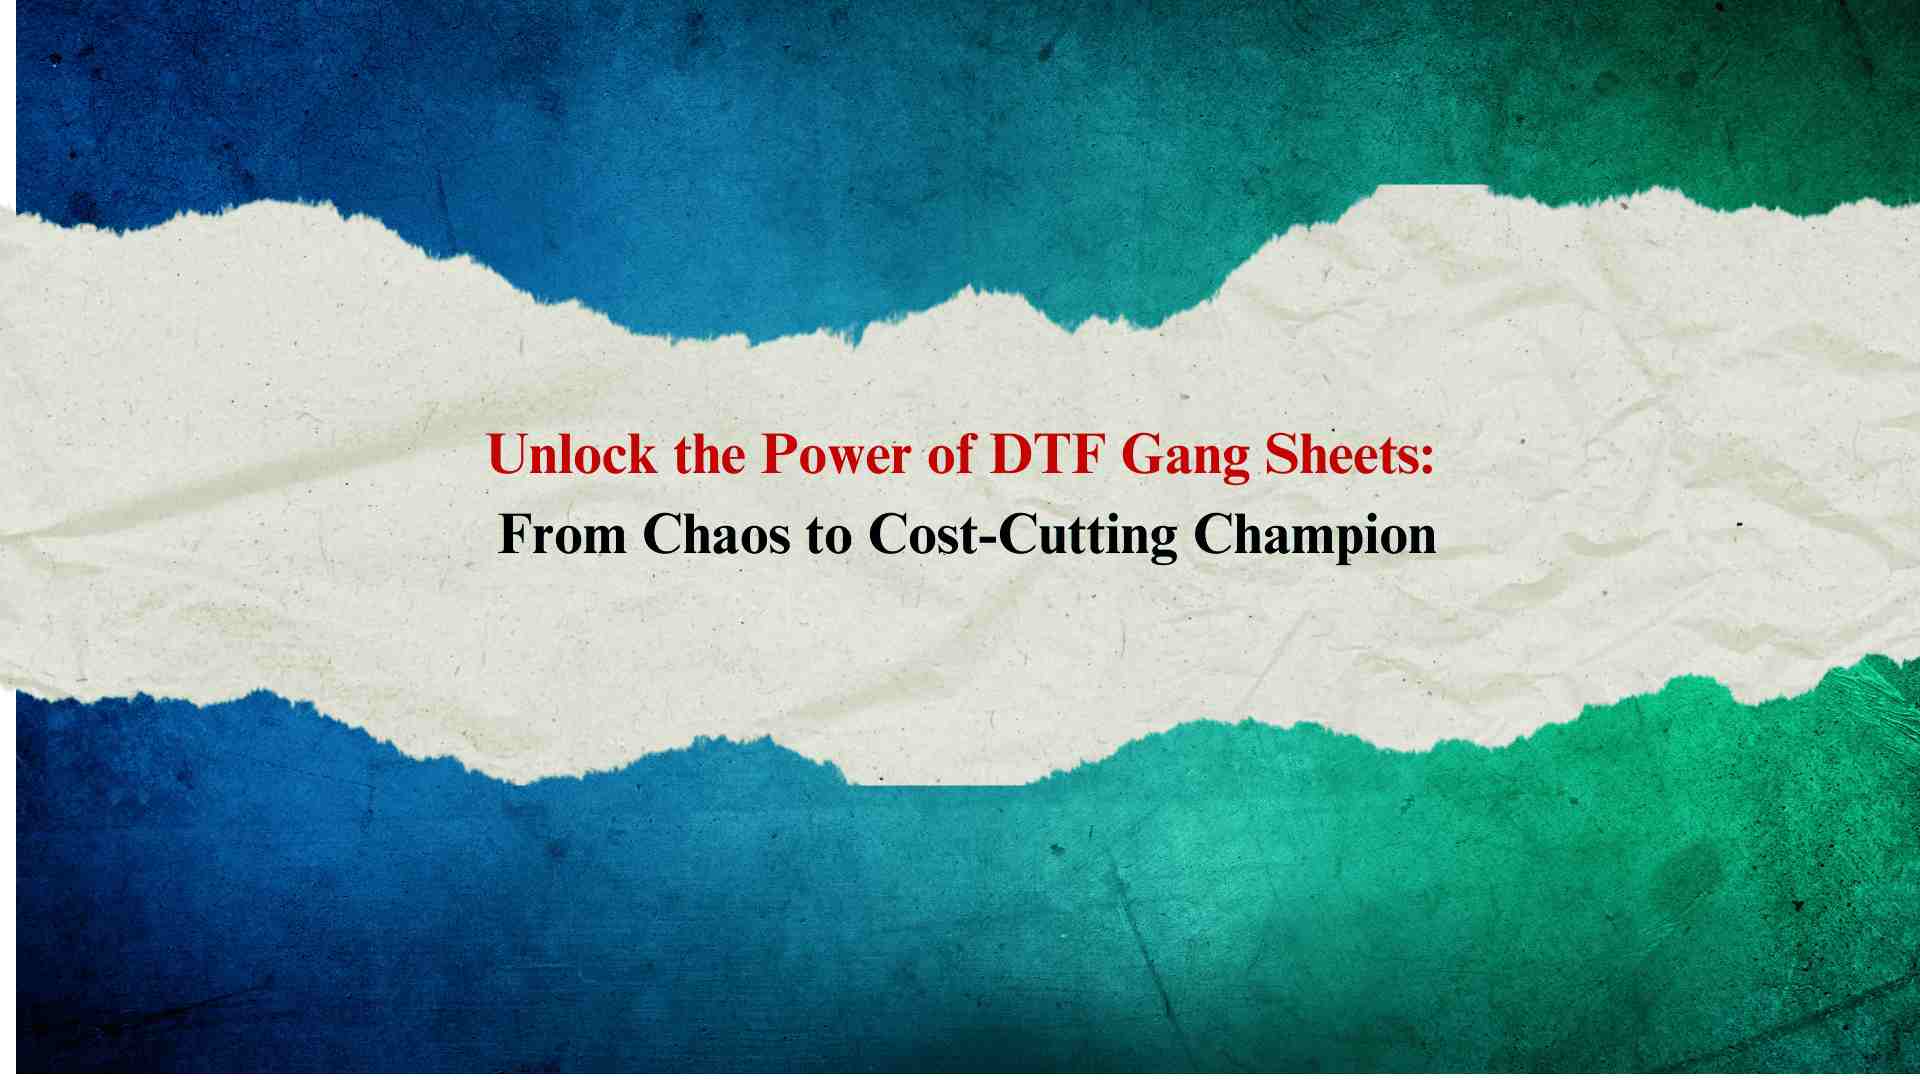 Unlock the Power of DTF Gang Sheets: From Chaos to Cost-Cutting Champion